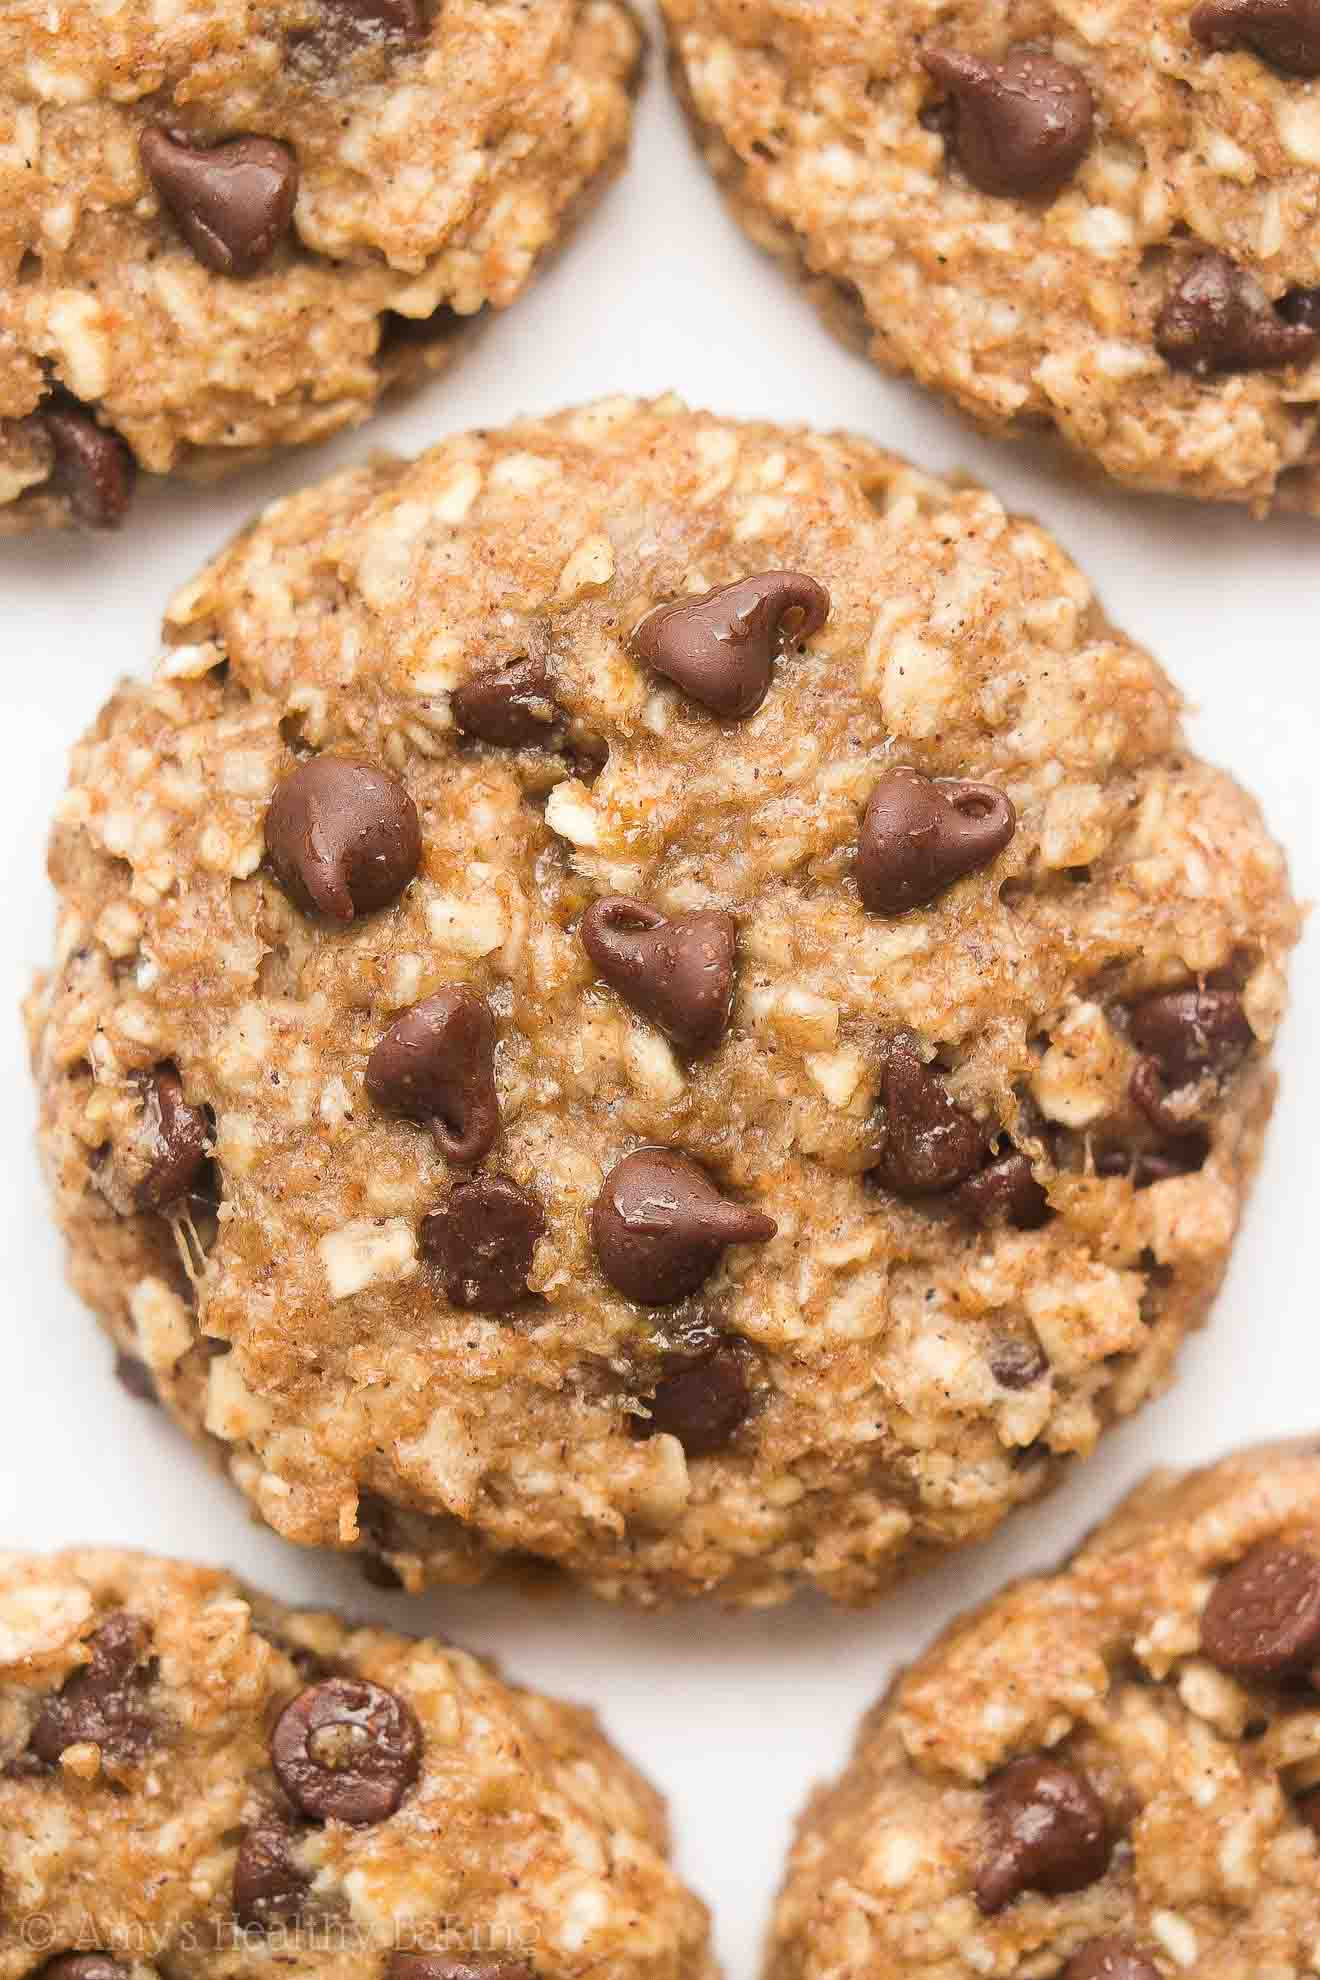 Oatmeal Chocolate Chip Cookies Healthy
 Healthy Chocolate Chip Banana Oatmeal Breakfast Cookies